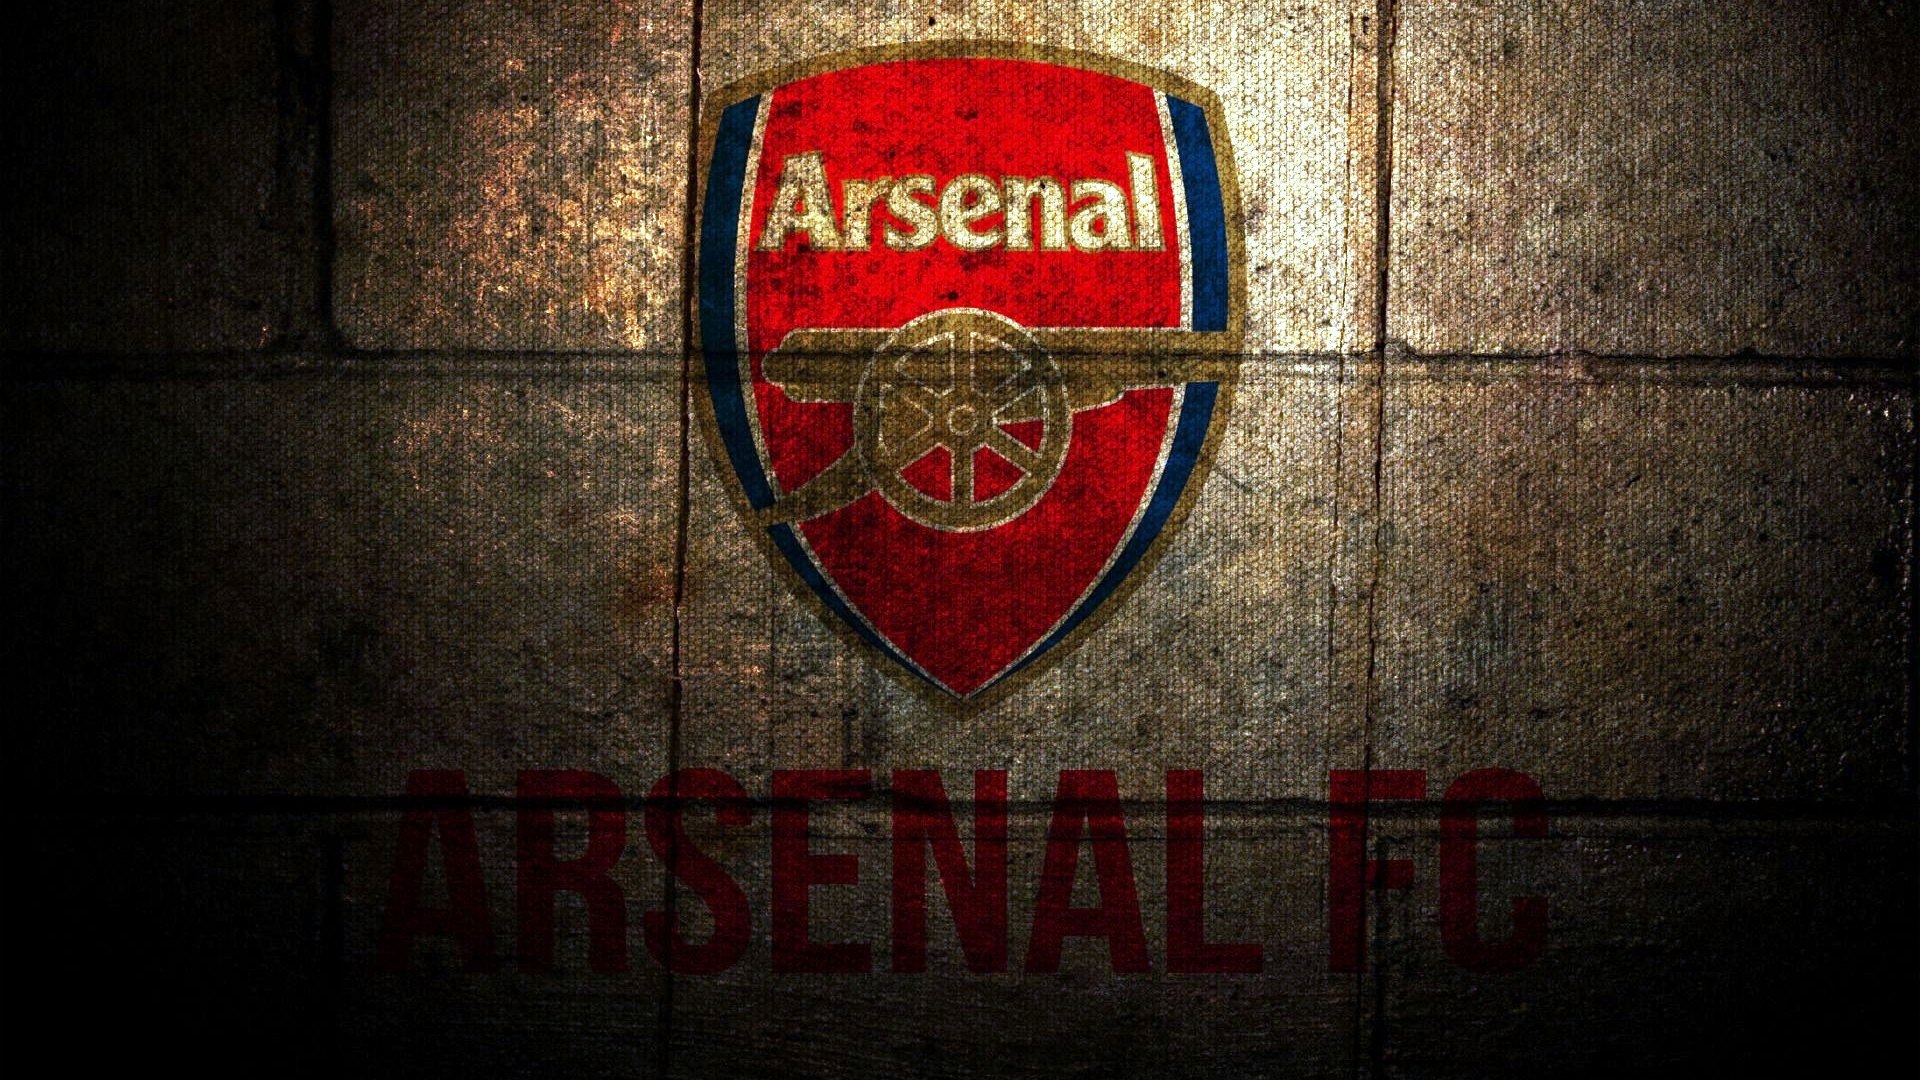 Wallpapers Arsenal Football Club with high-resolution 1920x1080 pixel. You can use this wallpaper for your Desktop Computers, Mac Screensavers, Windows Backgrounds, iPhone Wallpapers, Tablet or Android Lock screen and another Mobile device